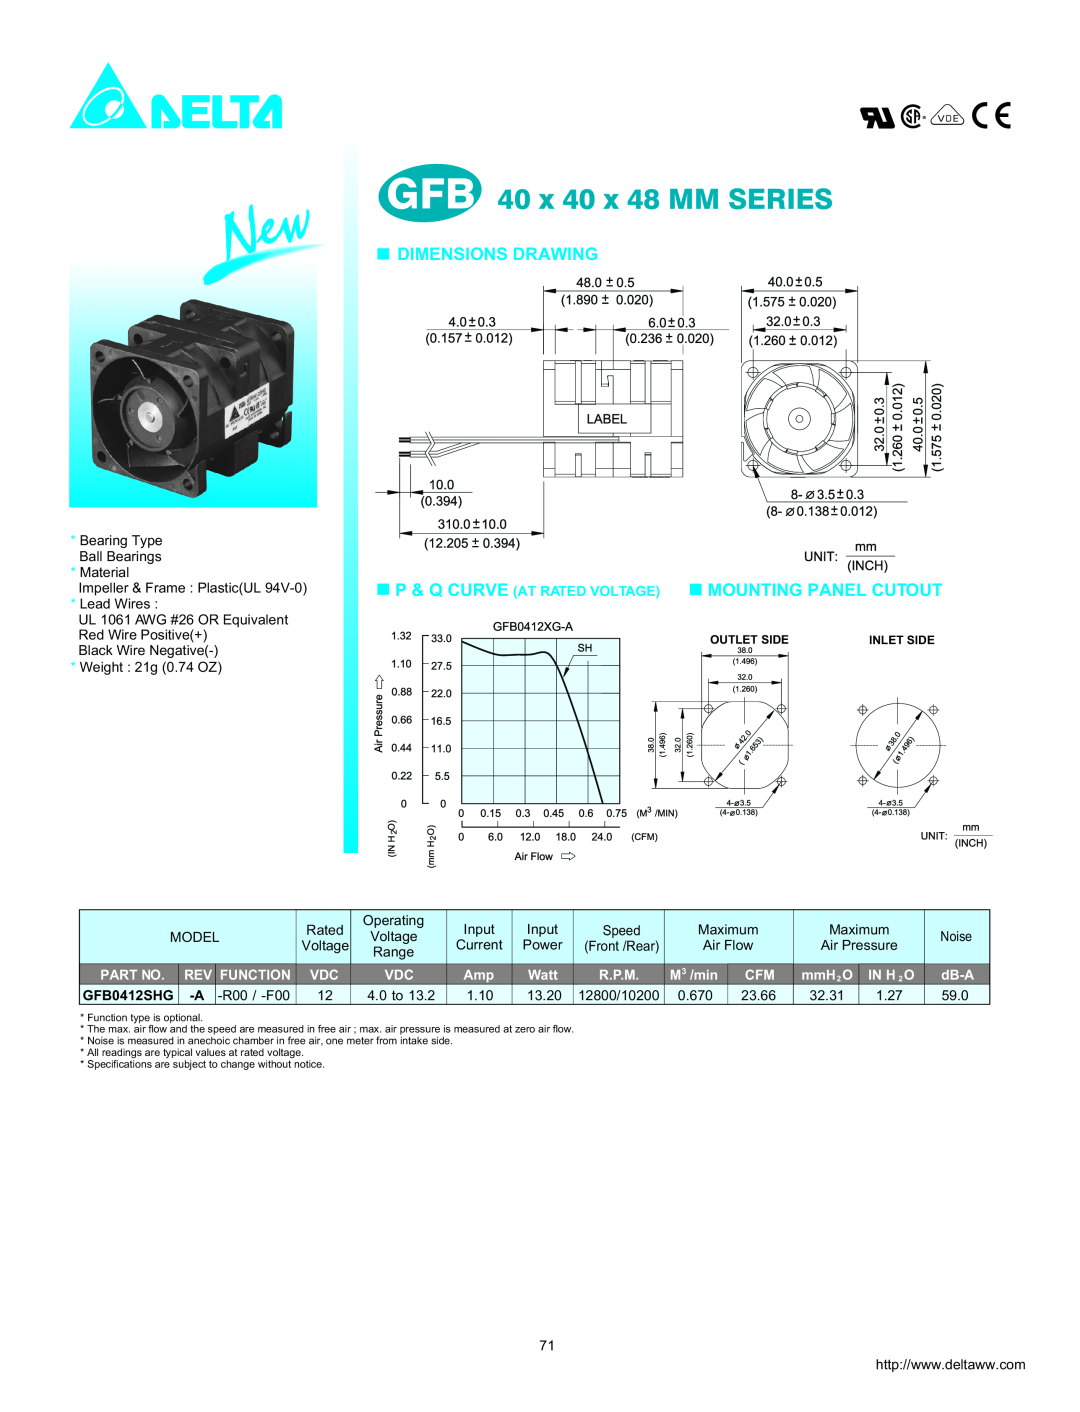 Delta Electronics GFB0412SHG dimensions GFB 40 x 40 x 48 MM SERIES, Dimensions Drawing, Mounting Panel Cutout, Function 